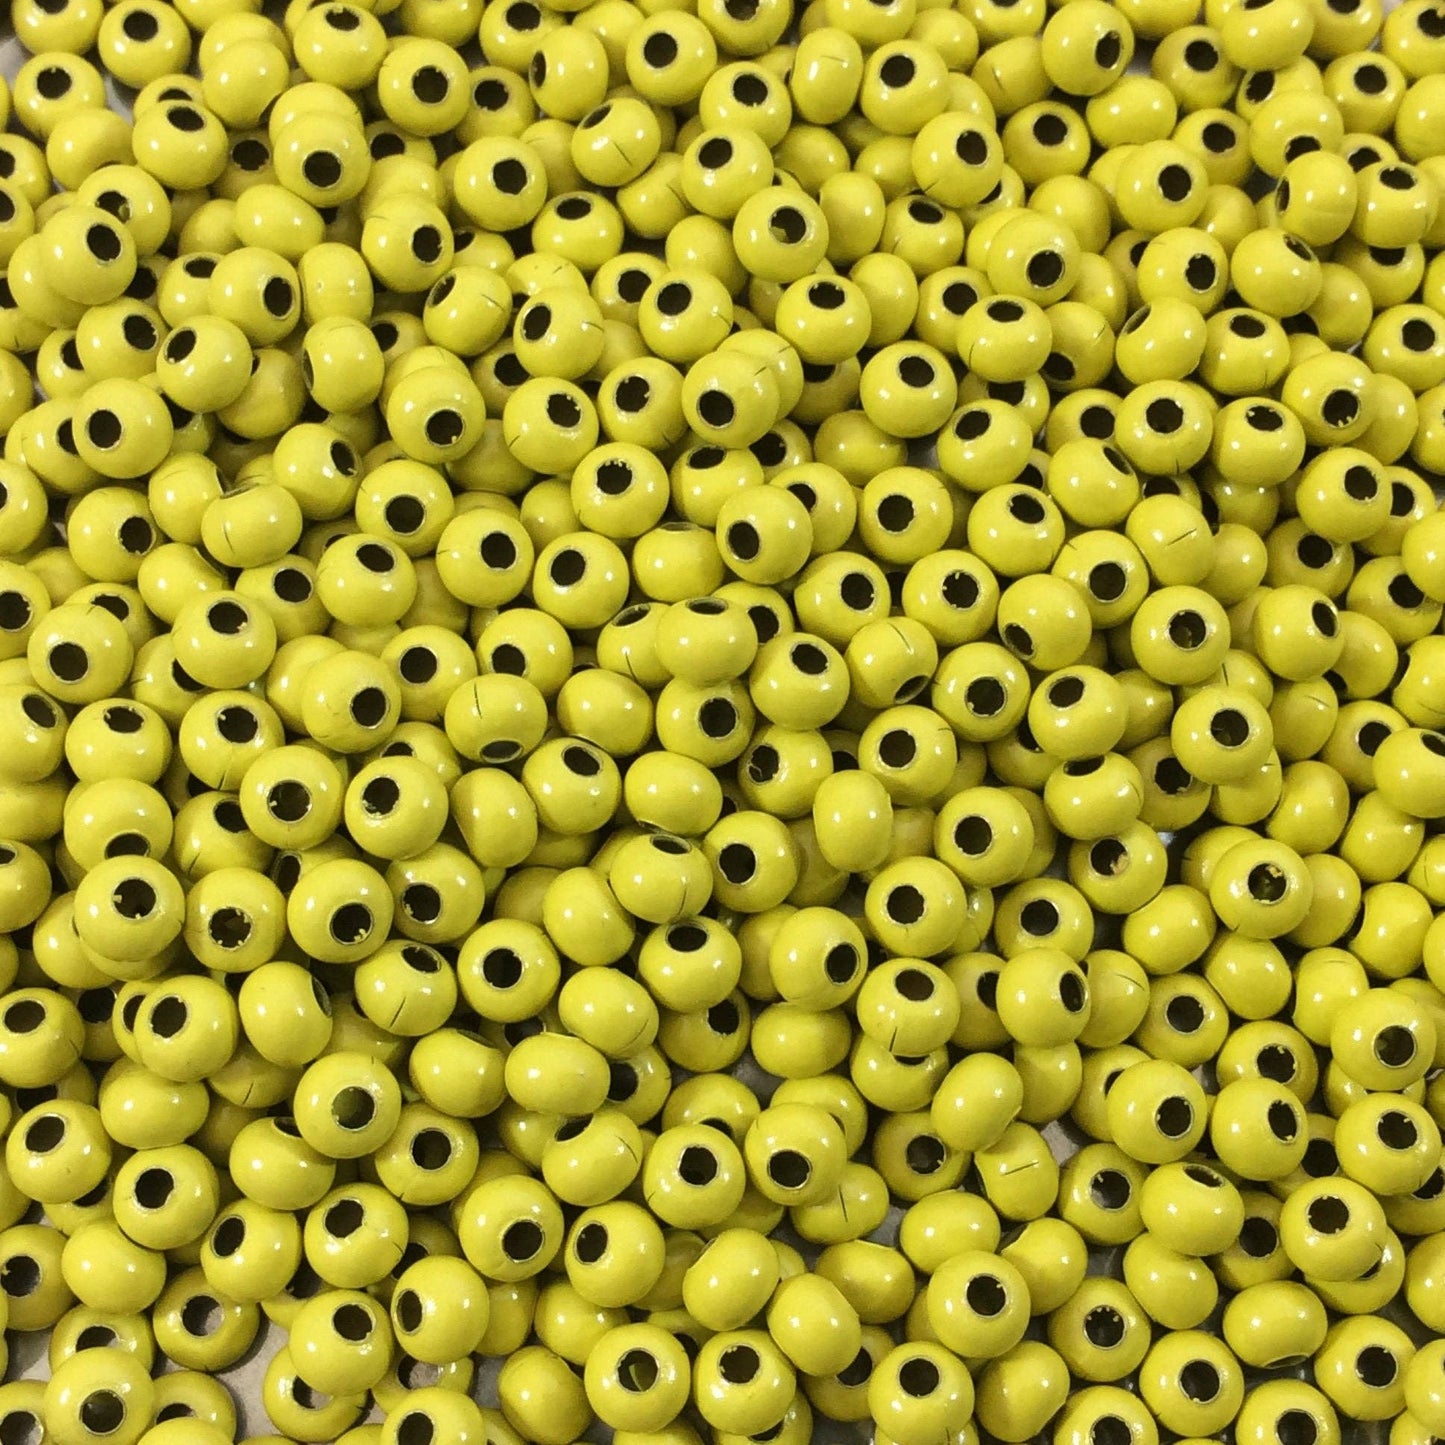 Size 8/0 Glossy Finish Yellow Coated Brass Seed Beads with 1.1mm Holes - Sold by 5", 36 Gram Tubes (~900 Beads per Tube) - (MT8-YEL)